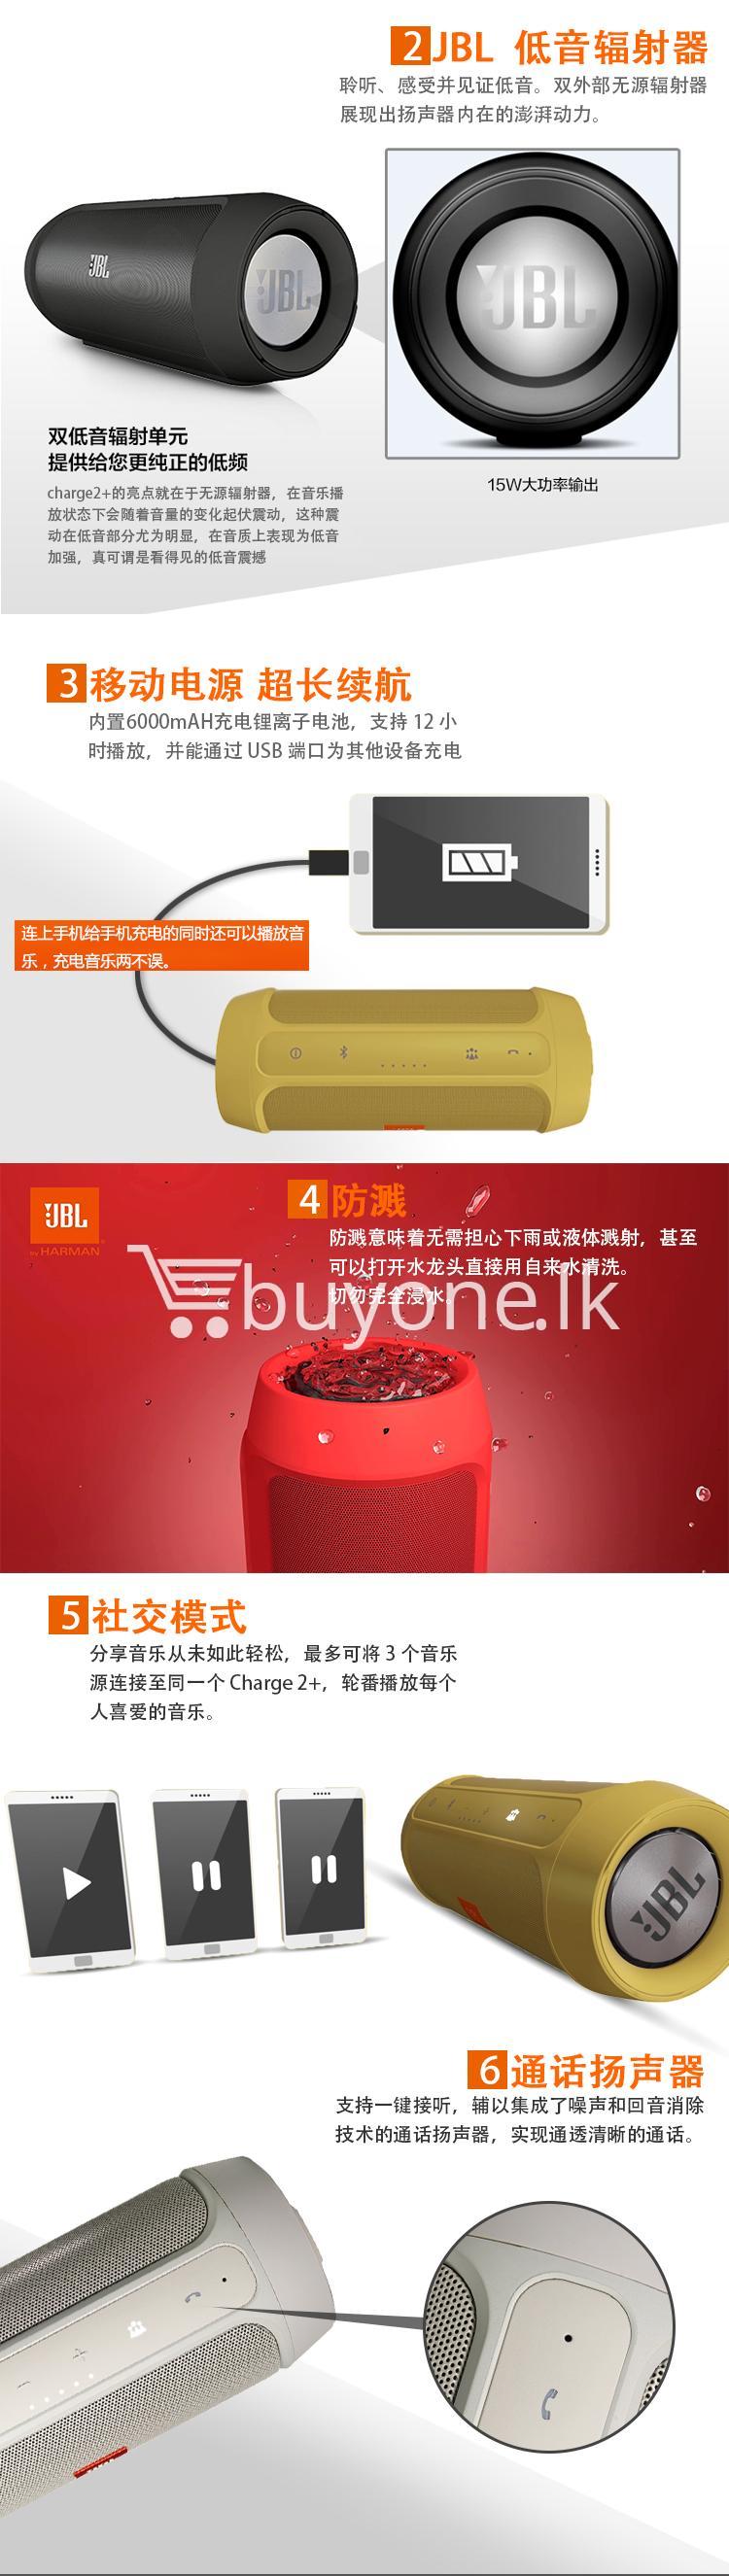 jbl charge 2 portable bluetooth speaker with usb charger power bank mobile phone accessories special best offer buy one lk sri lanka 08939 - JBL Charge 2 Portable Bluetooth Speaker with USB Charger Power Bank